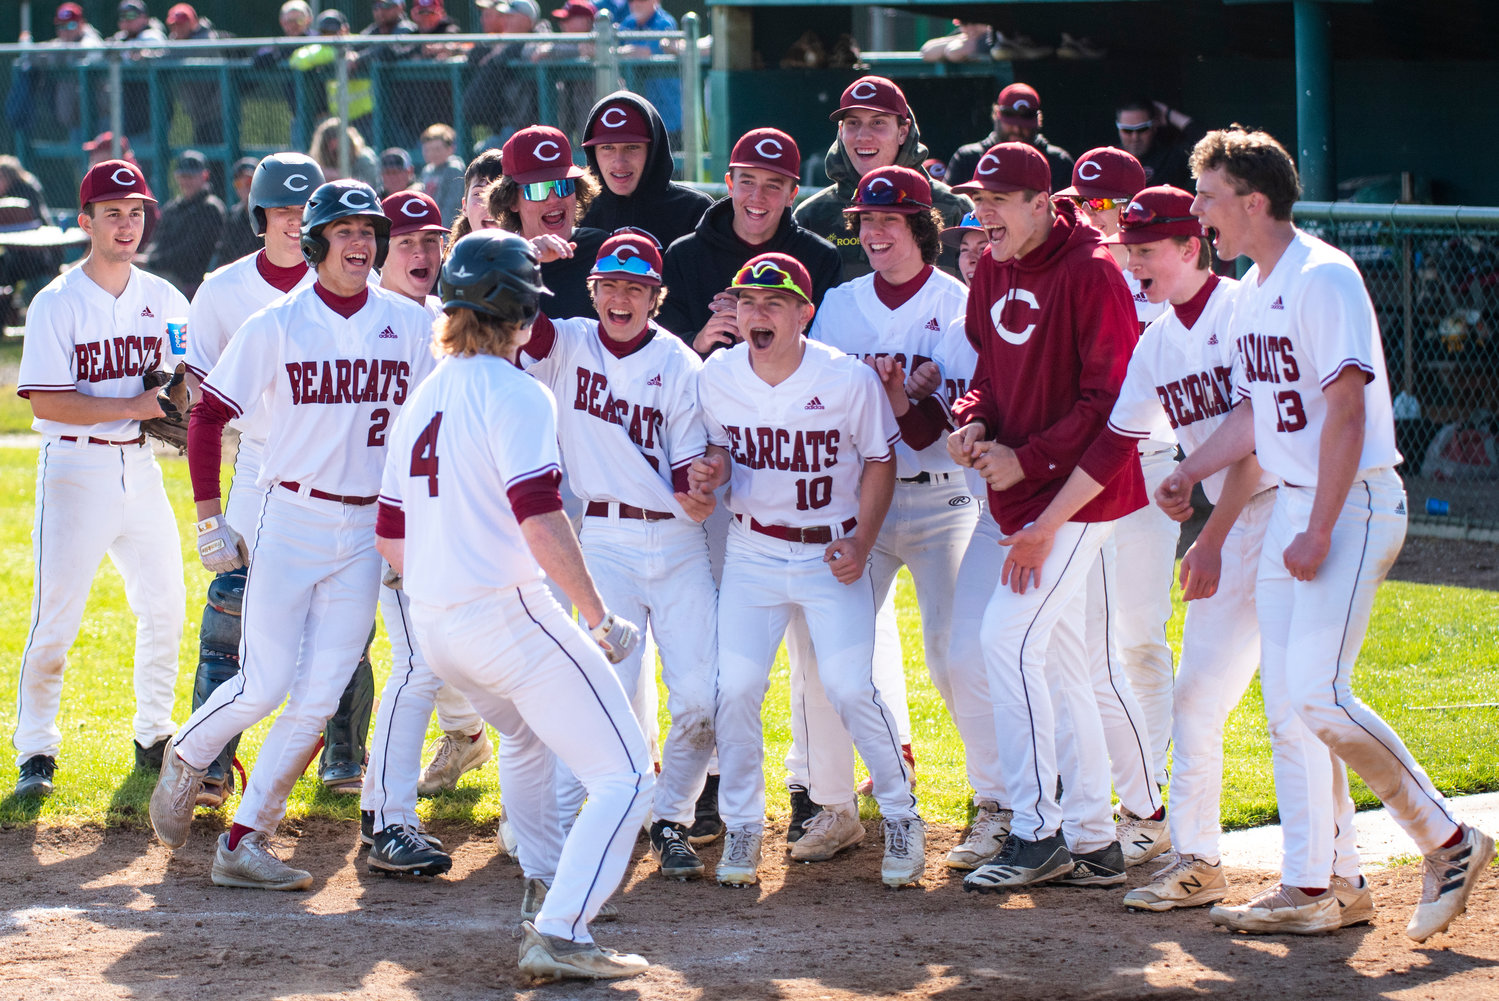 W.F. West baseball meets senior Logan Moore at home plate after Moore hit a home run in the fourth inning of the Bearcats' 11-1 win over Ridgefield in a 2A District IV opener at home on Tuesday, May 10.